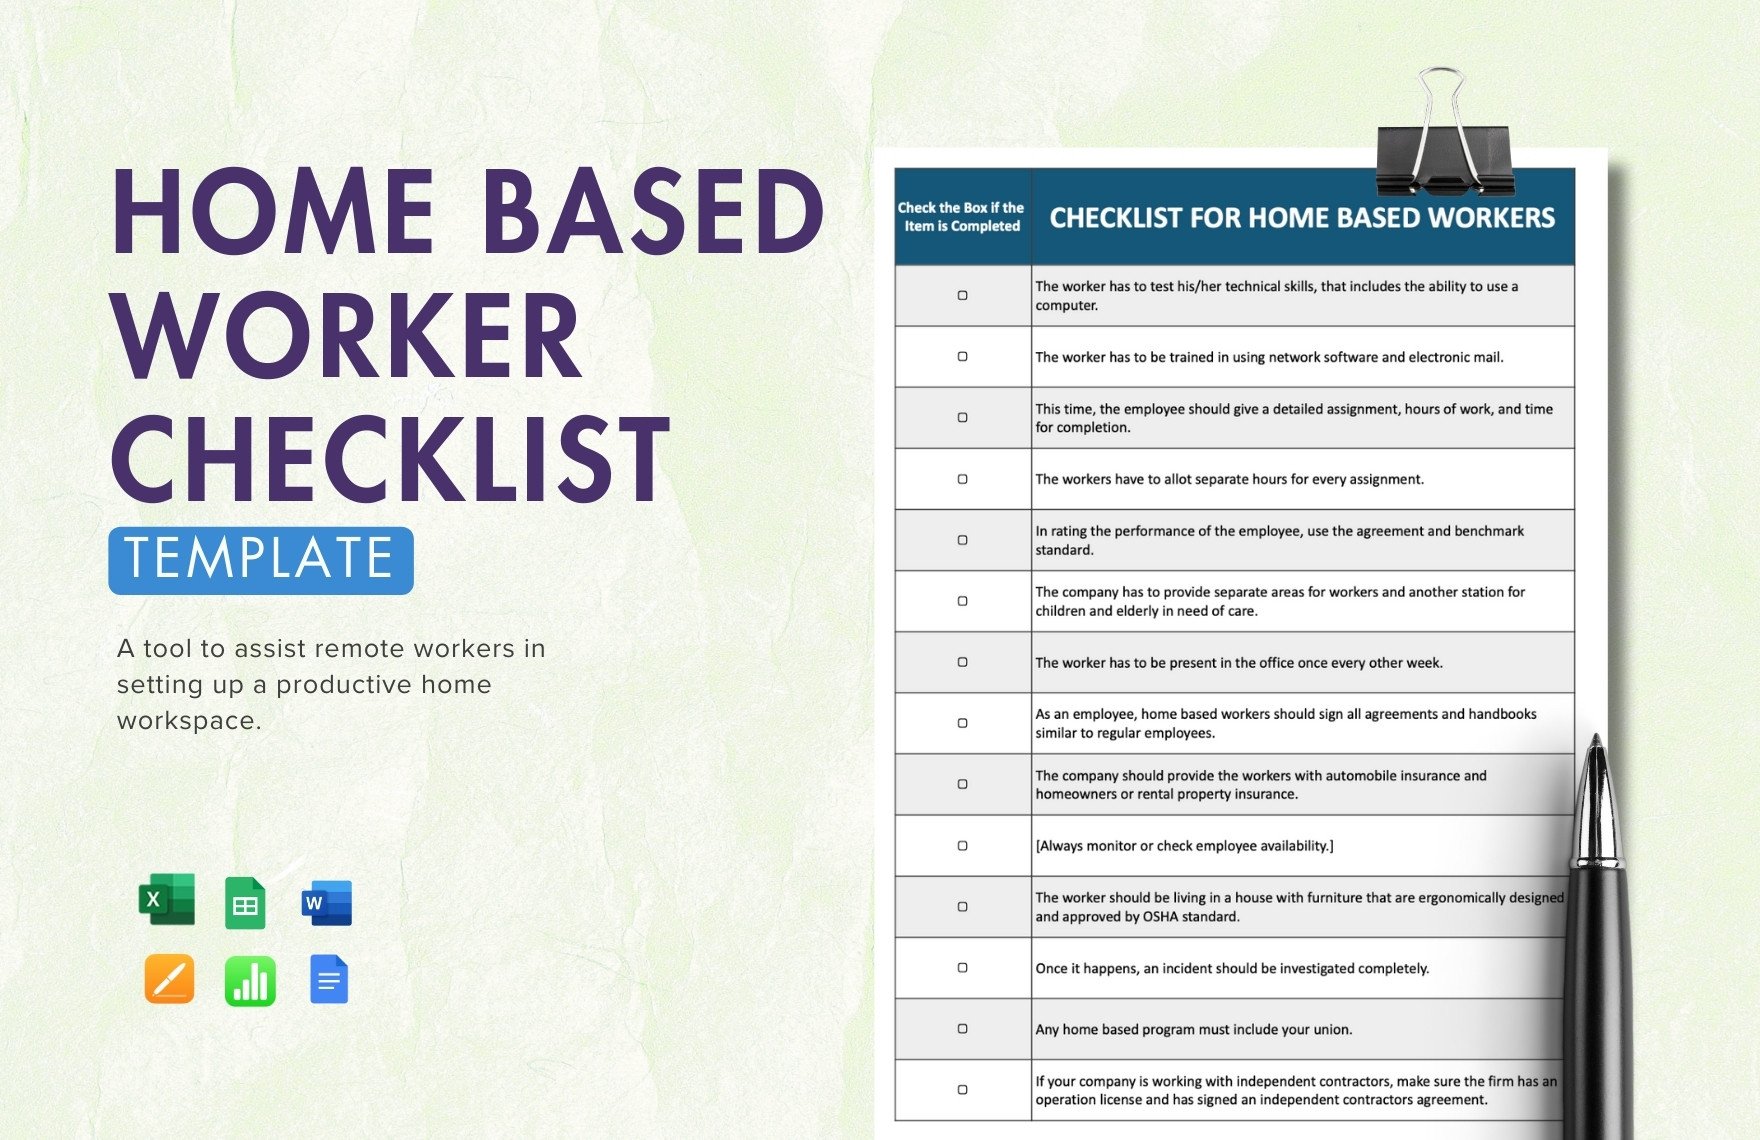 Home Based Worker Checklist Template in Word, Google Docs, Excel, Google Sheets, Apple Pages, Apple Numbers